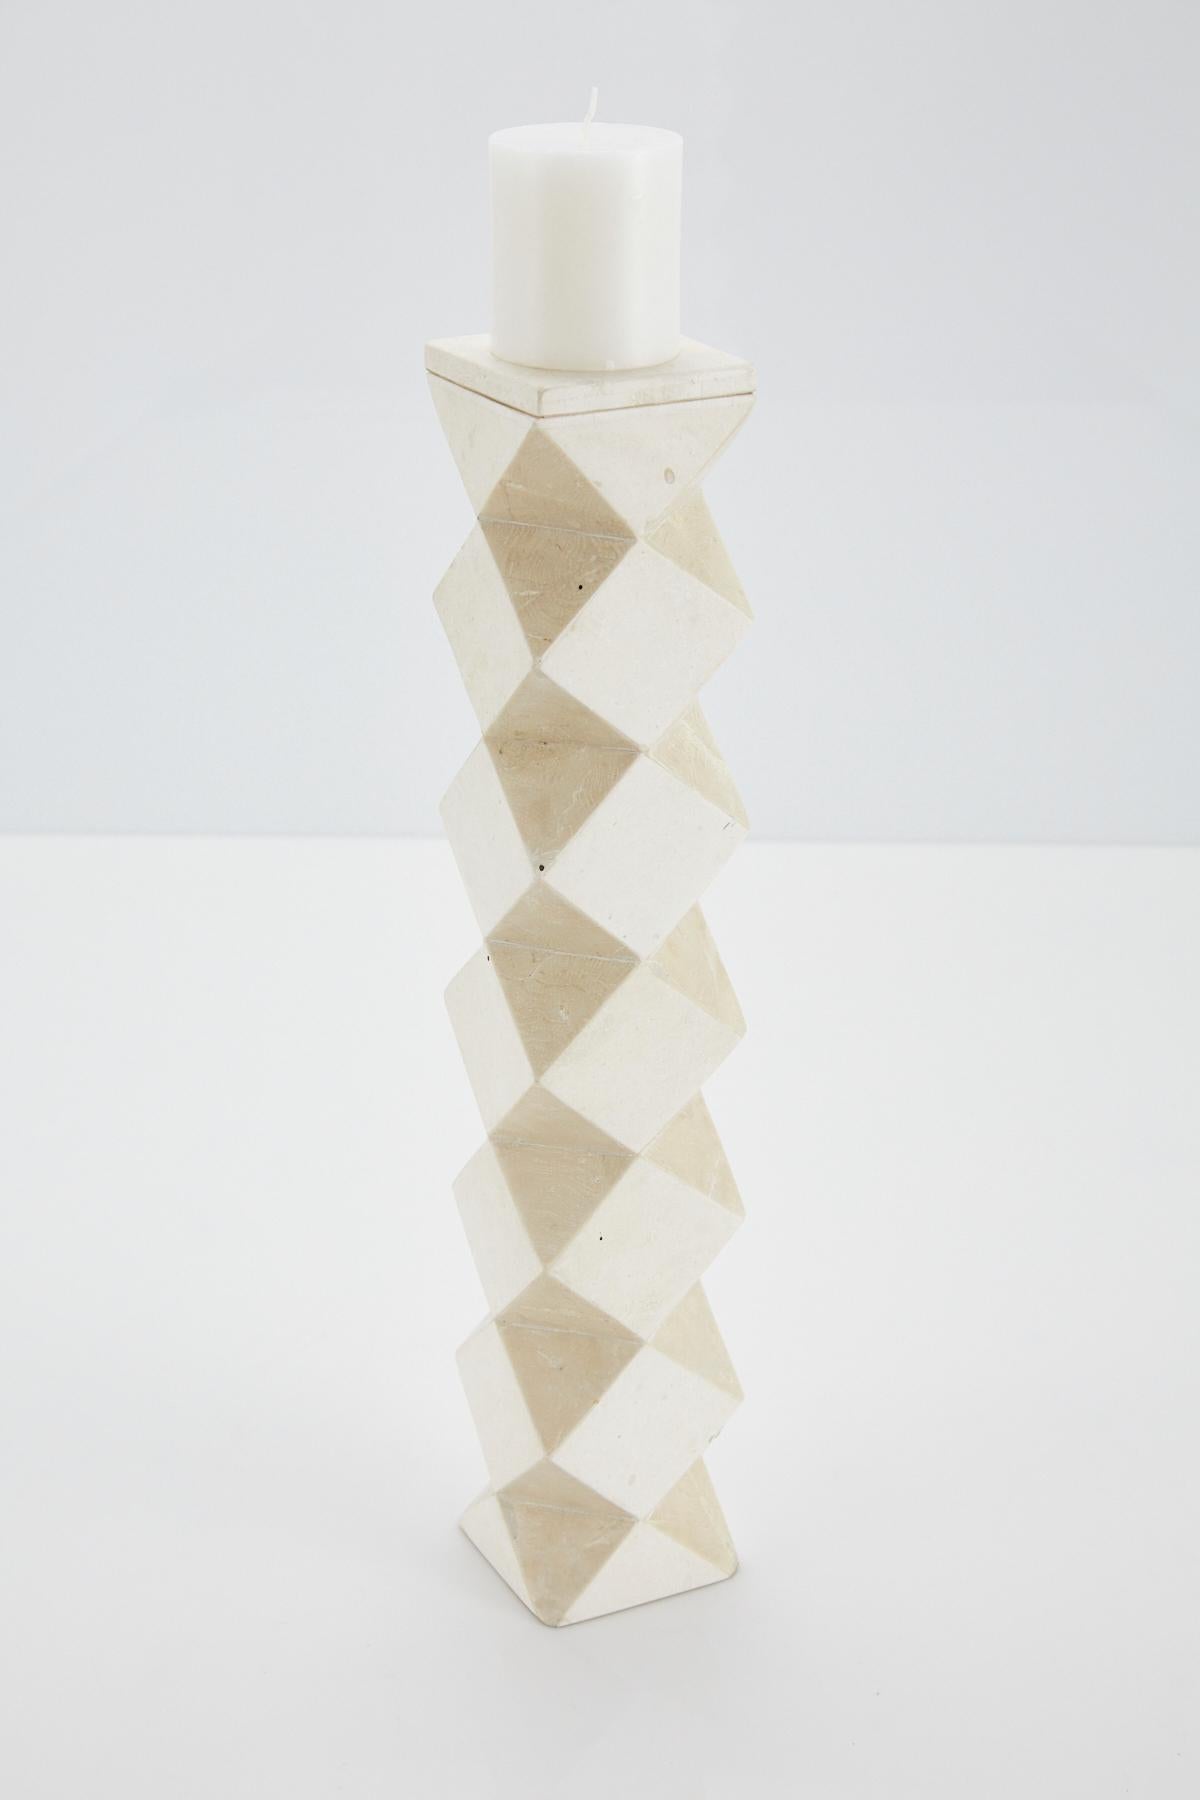 Tall Convertible Faceted Postmodern Tessellated Stone Candlestick or Vase, 1990s (Gemalt) im Angebot